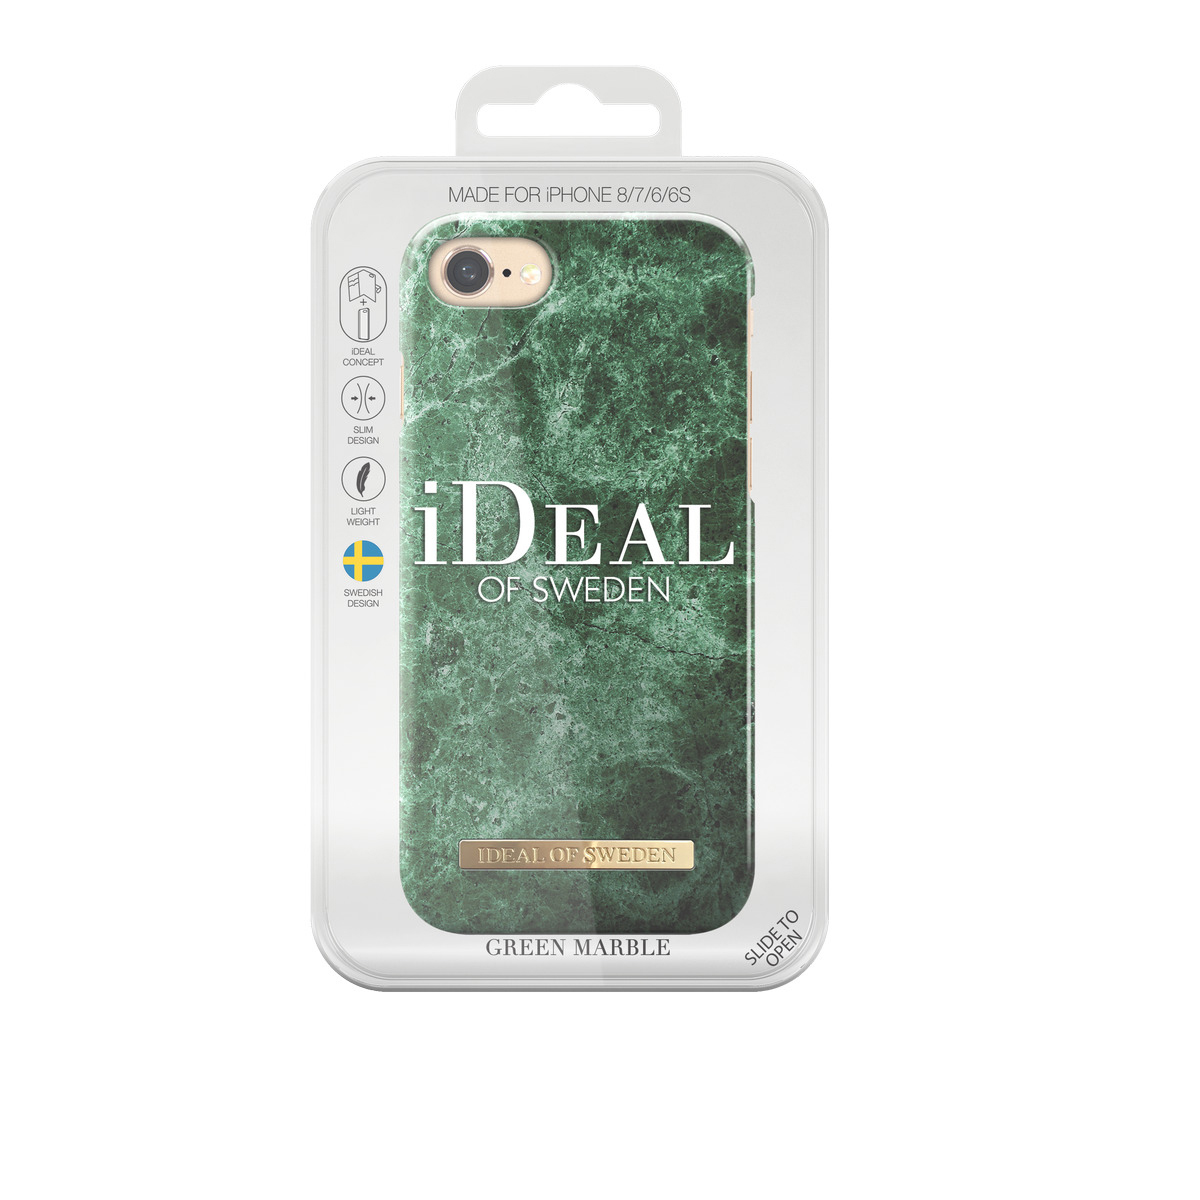 7, 8, SWEDEN Fashion, IDEAL iPhone Marble Apple, iPhone iPhone 6, Green Backcover, OF